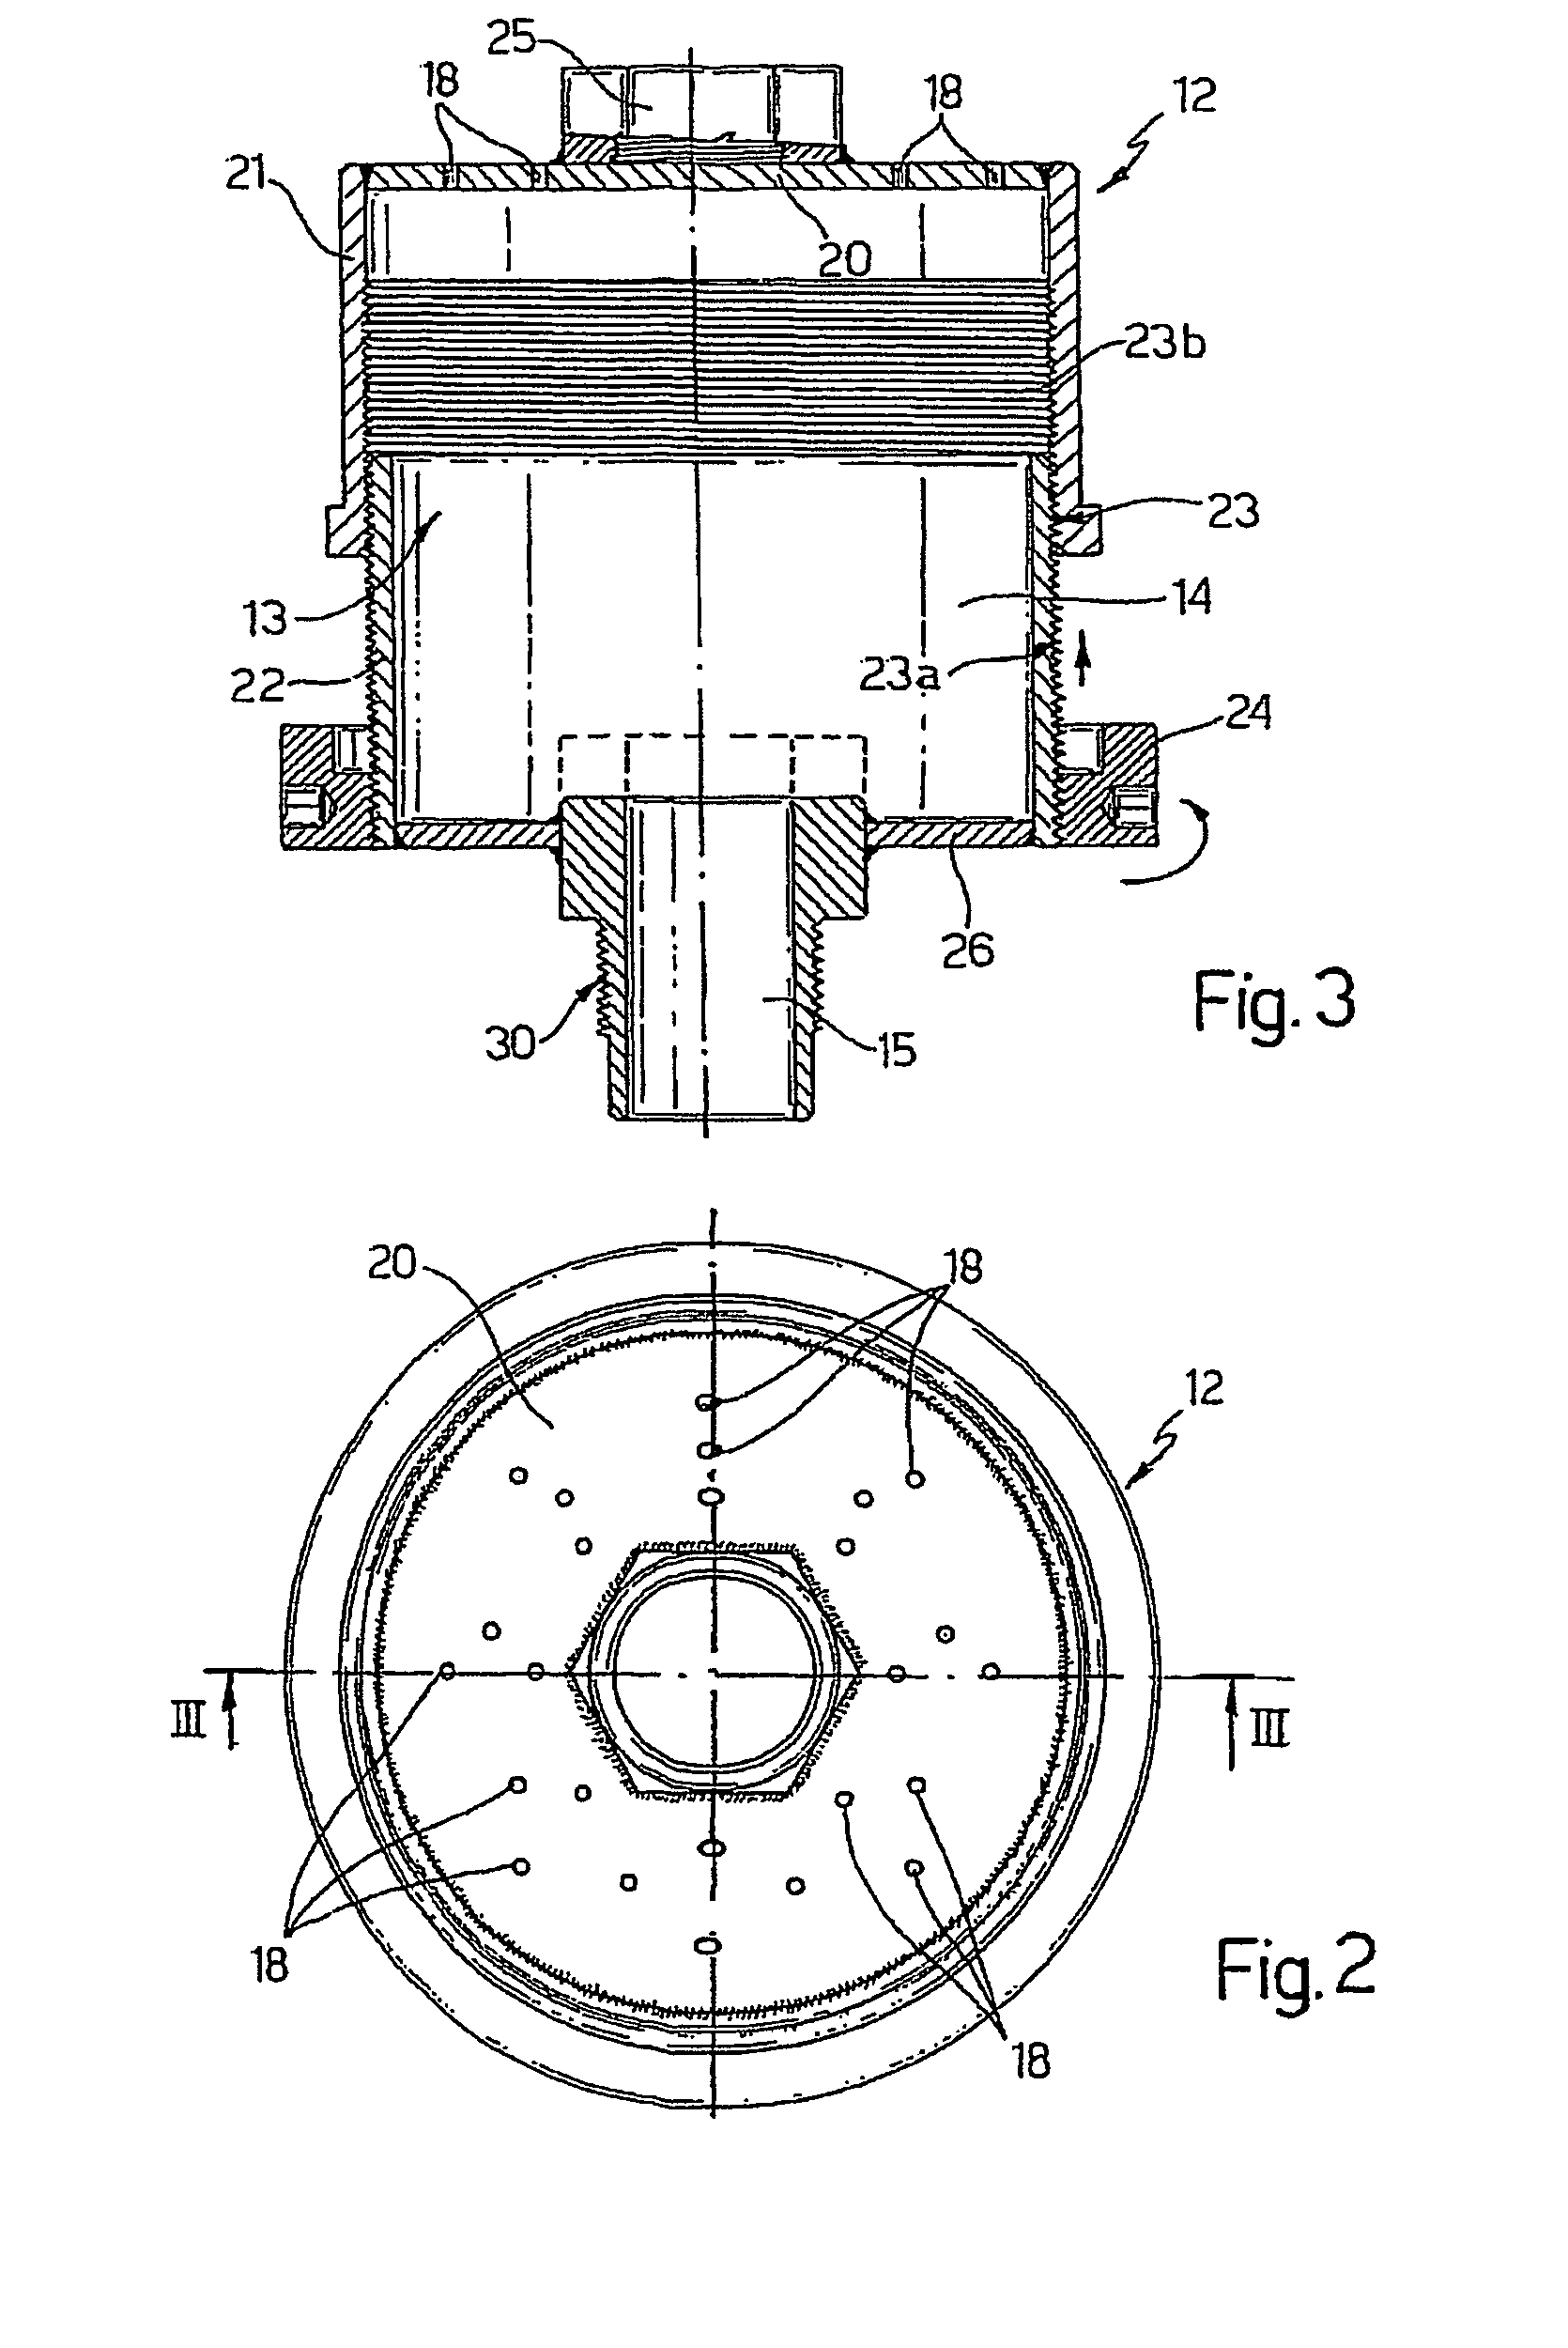 System for damping thermo-acoustic instability in a combustor device for a gas turbine